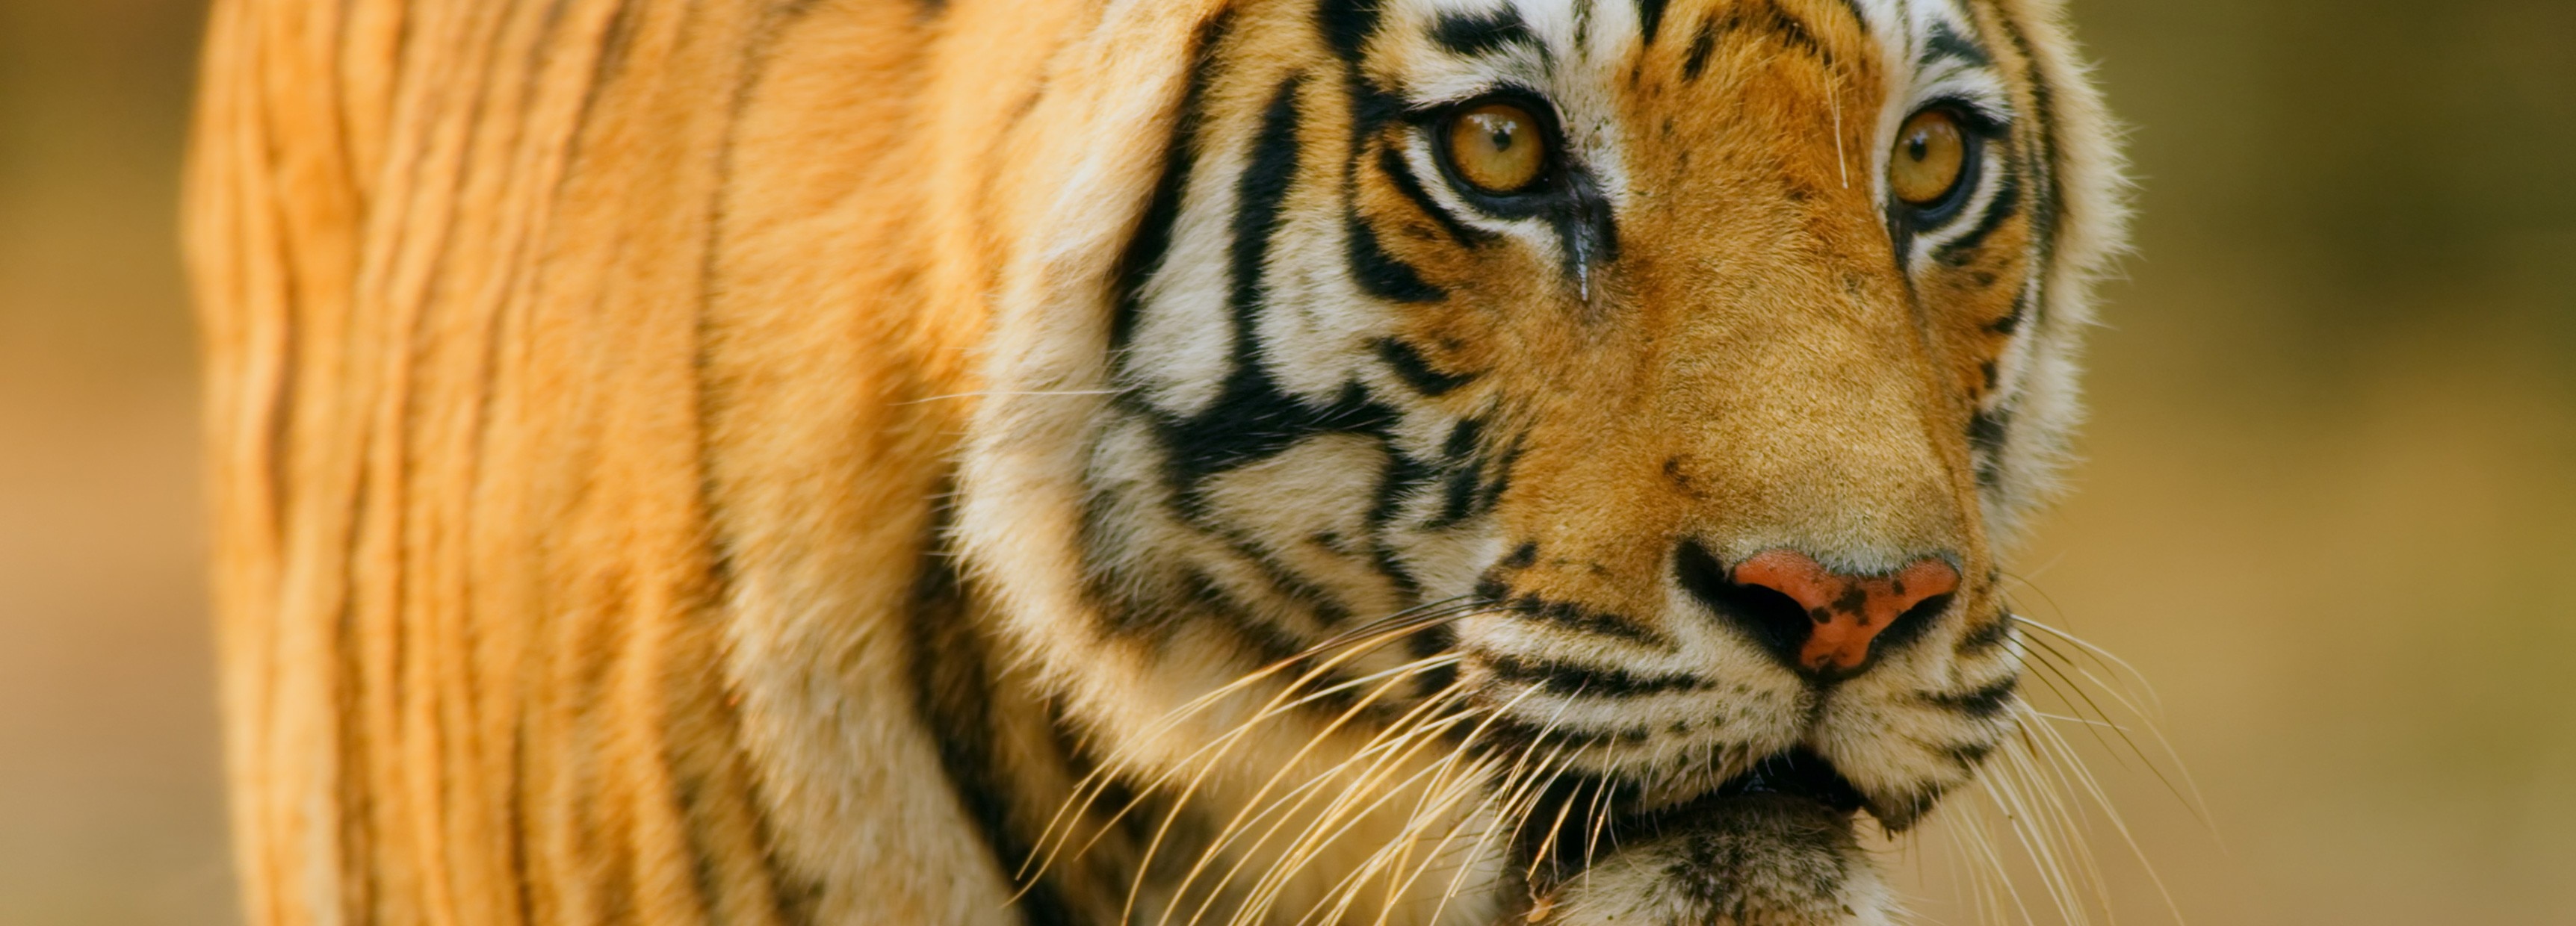 How to spot a tiger before it finds you | BBC Earth